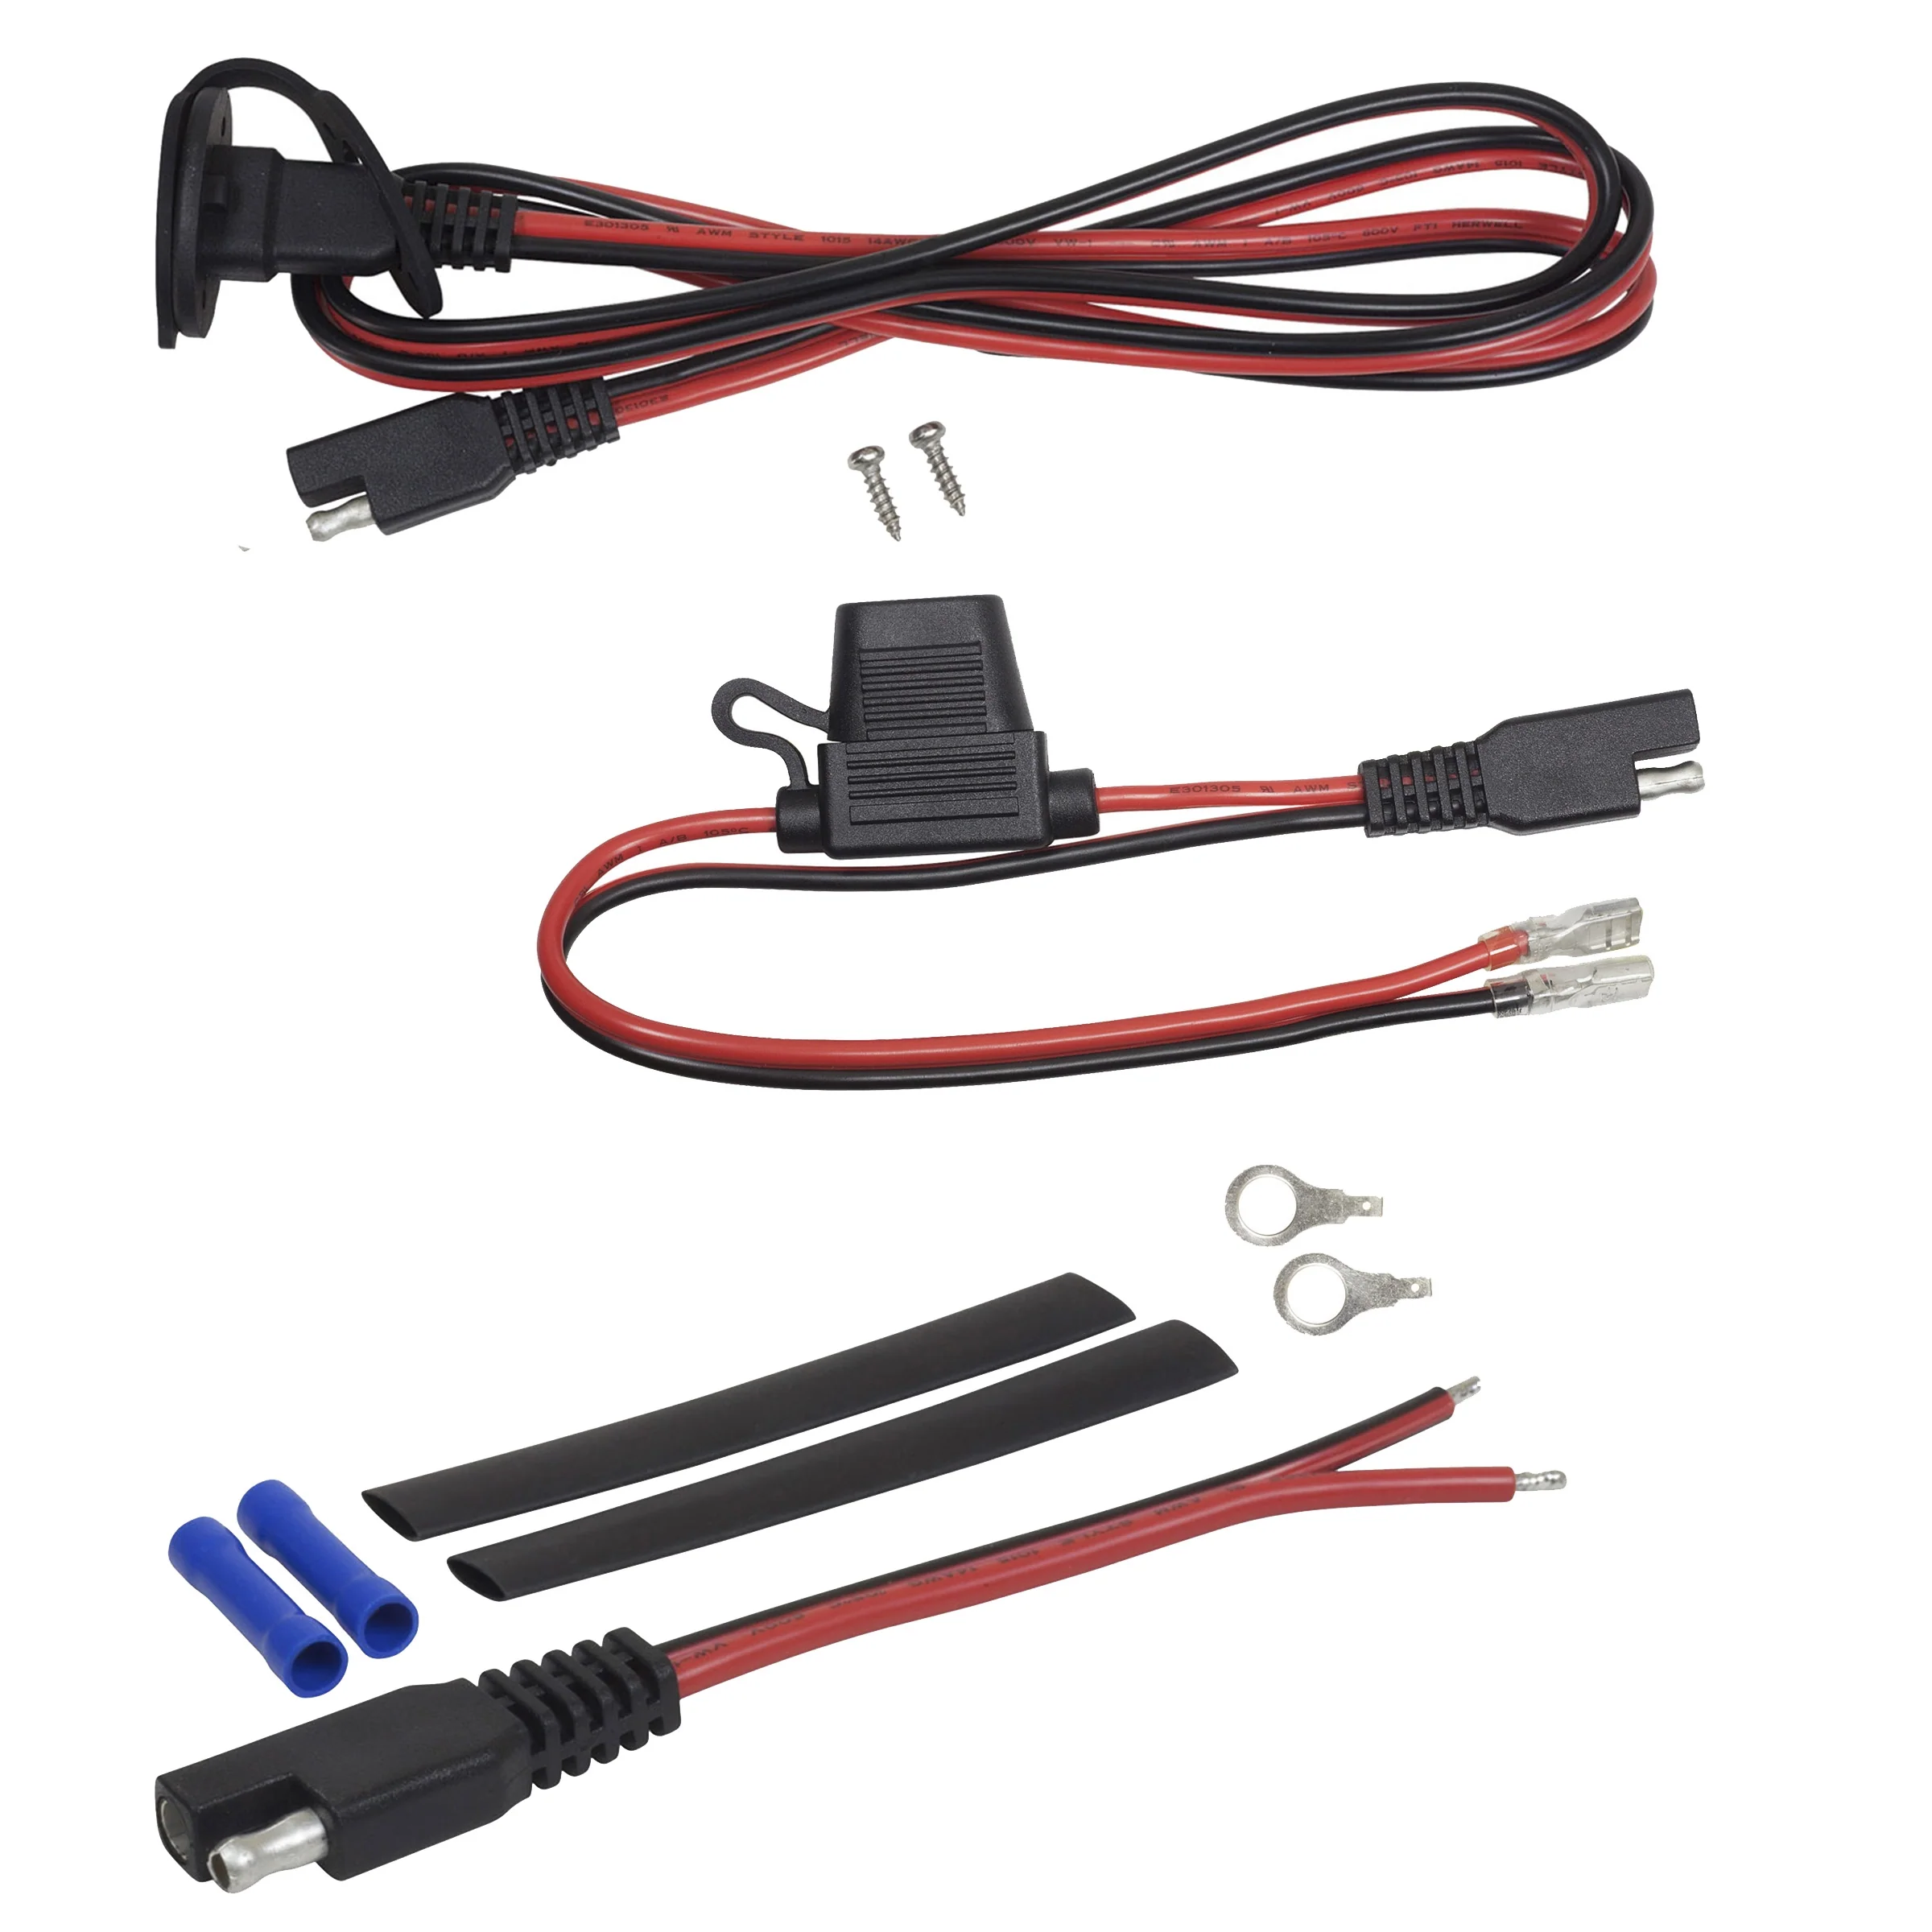 What cable do I need to connect my naqua batteryto the 5 wire system power pack